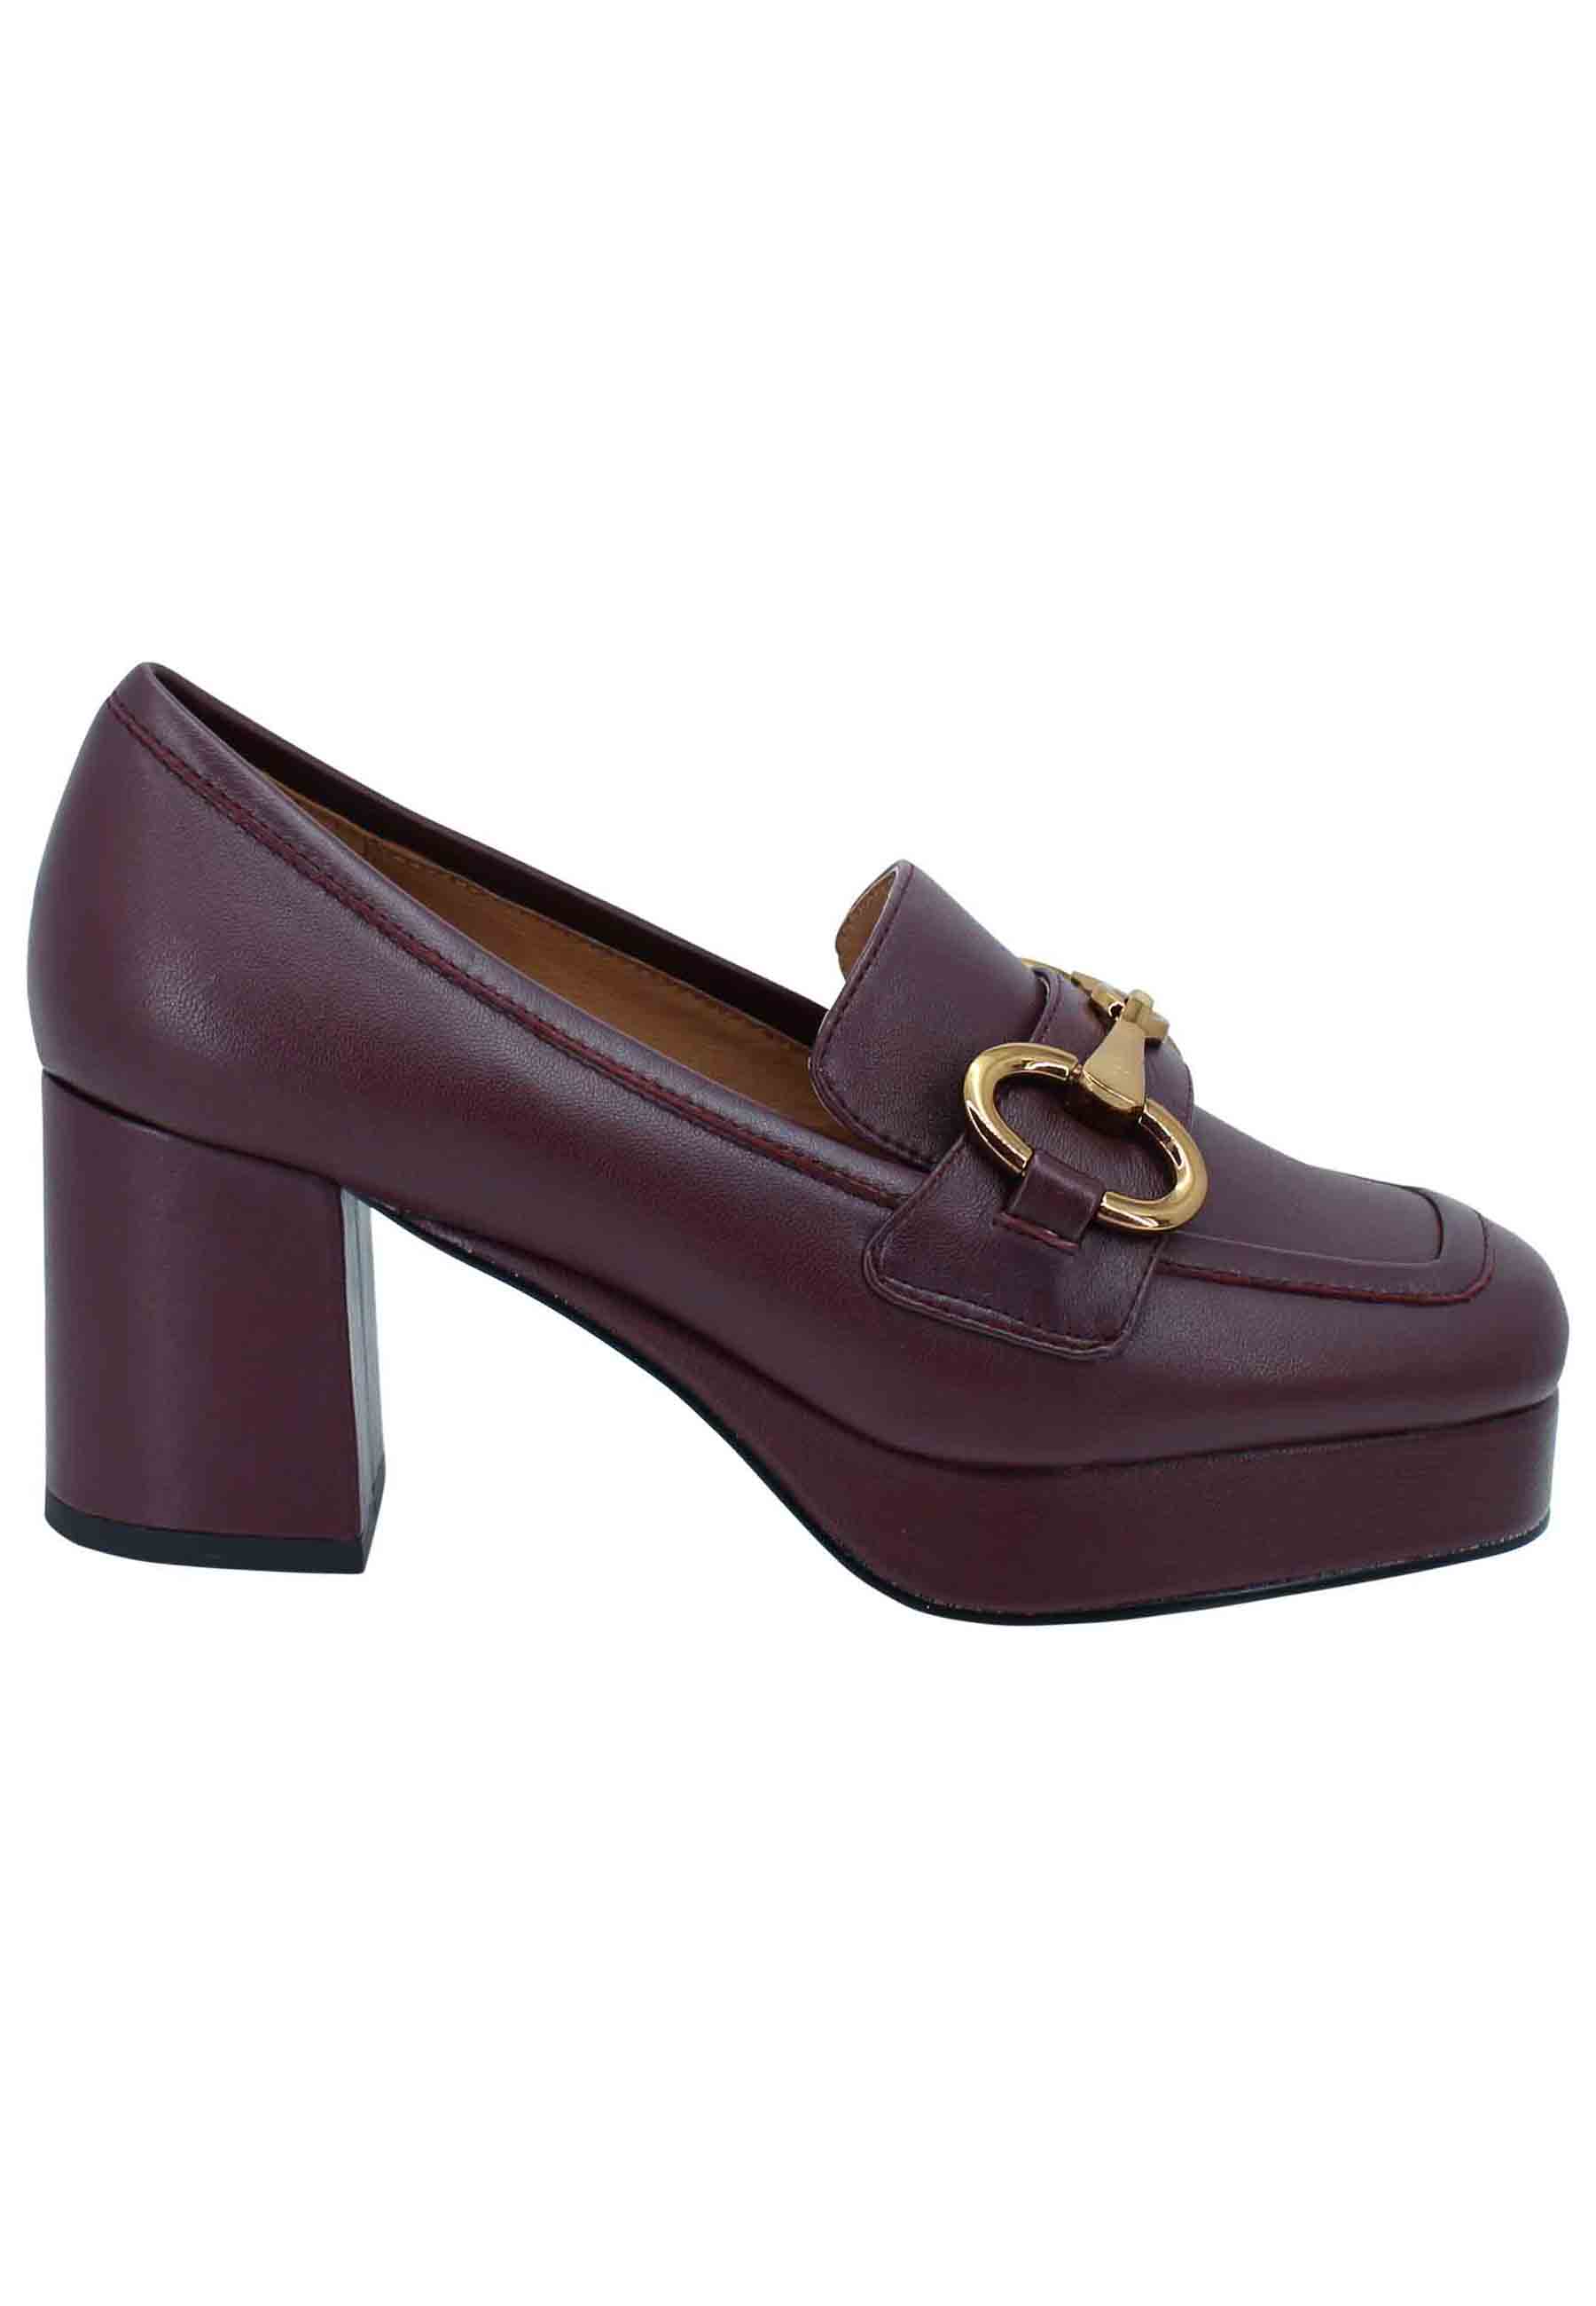 Women's moccasins in burgundy leather with gold clamp heel and platform